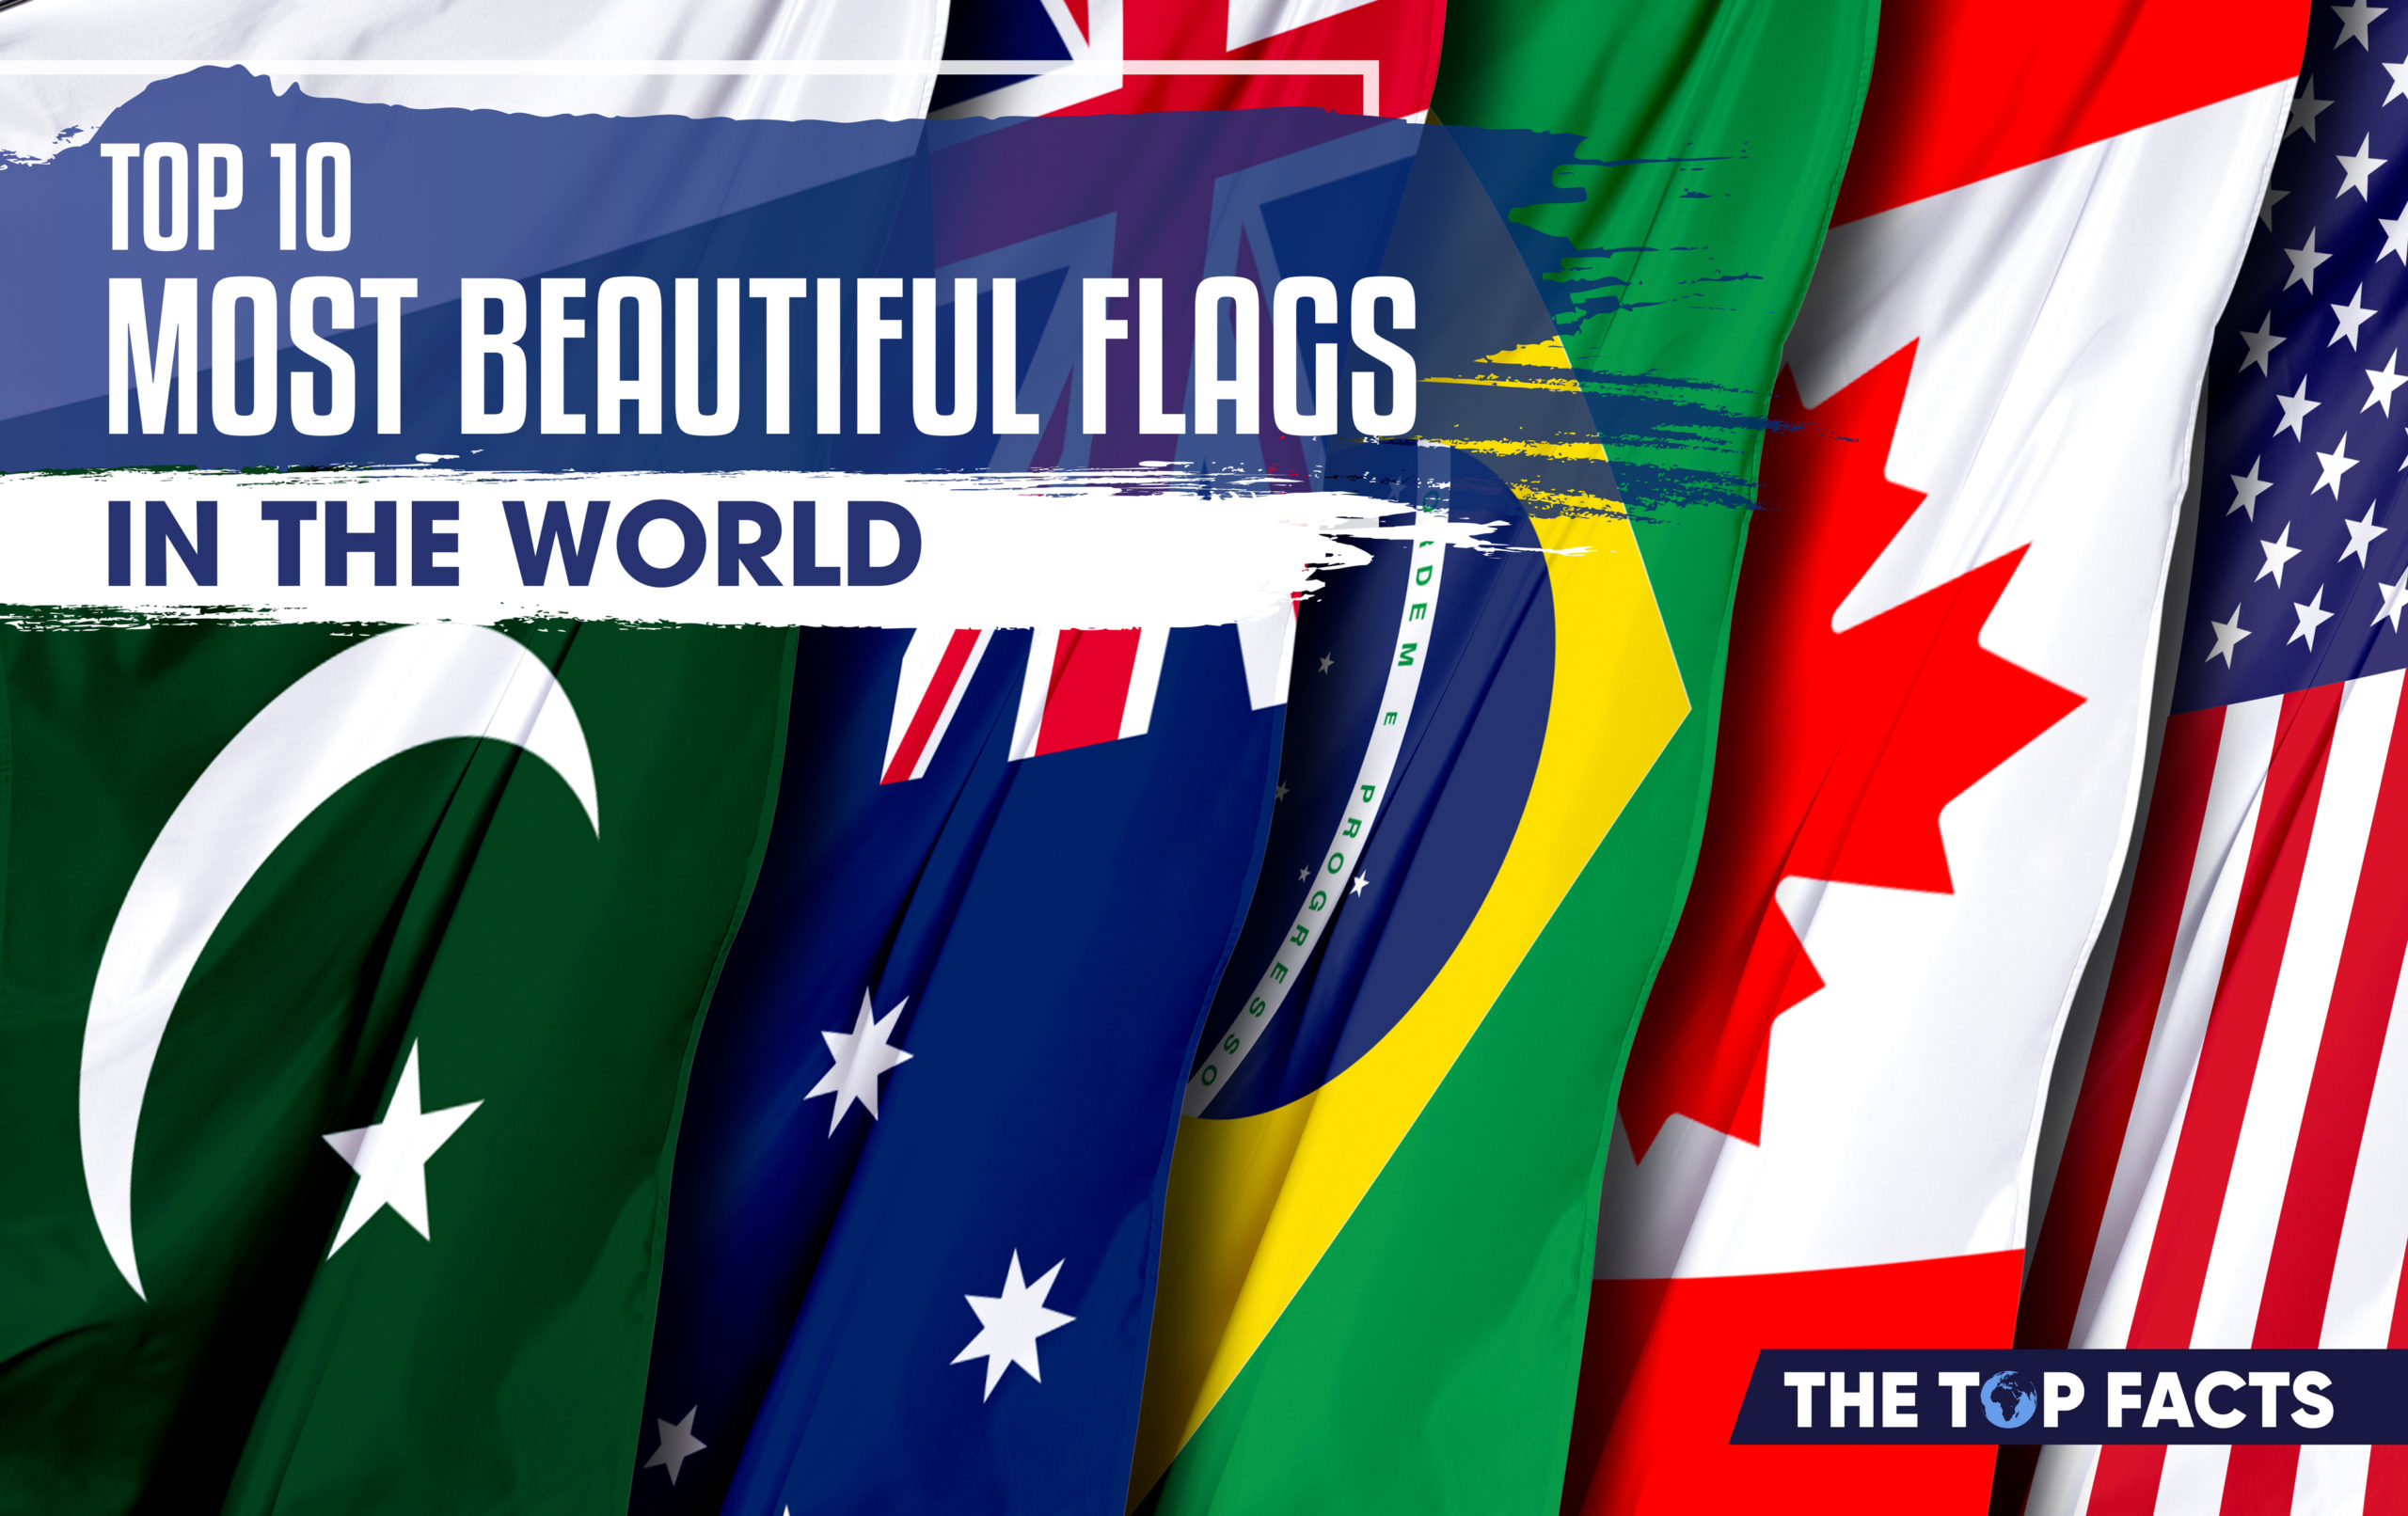 Top 10 Most Beautiful Flags